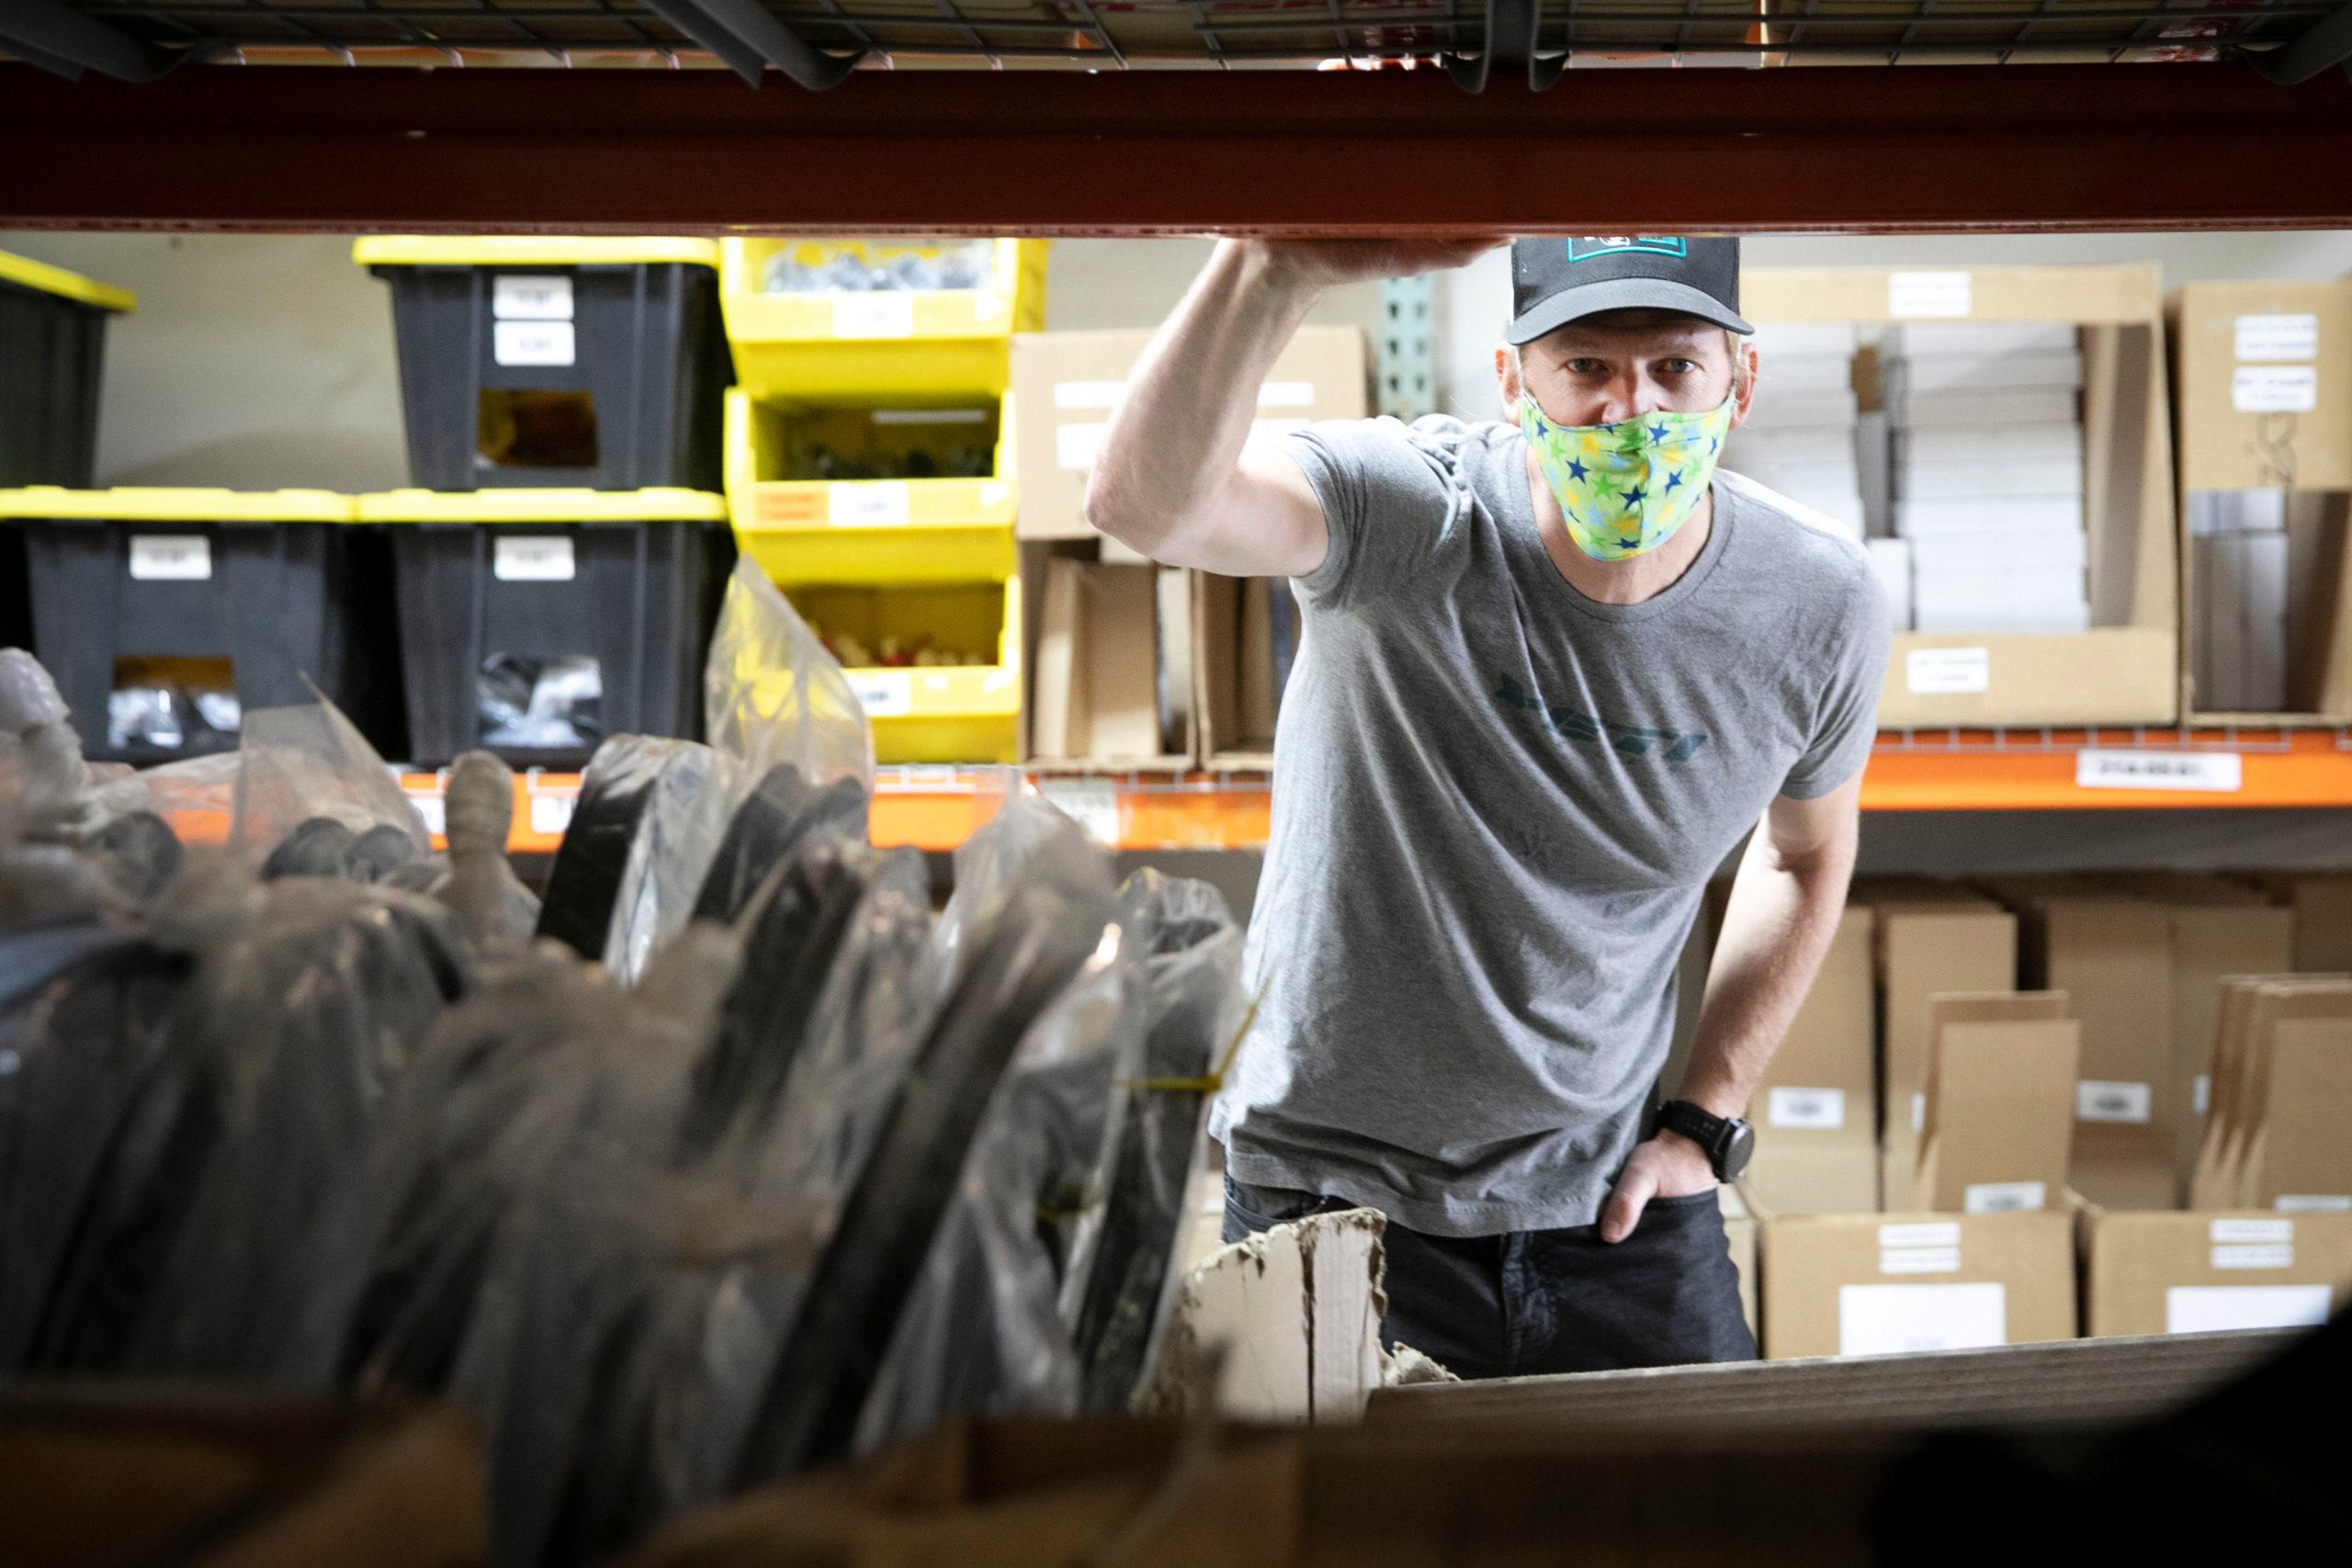 Yeti Cycles Retools To Make Face Shields For COVID-19 First Responders And Health Care Workers